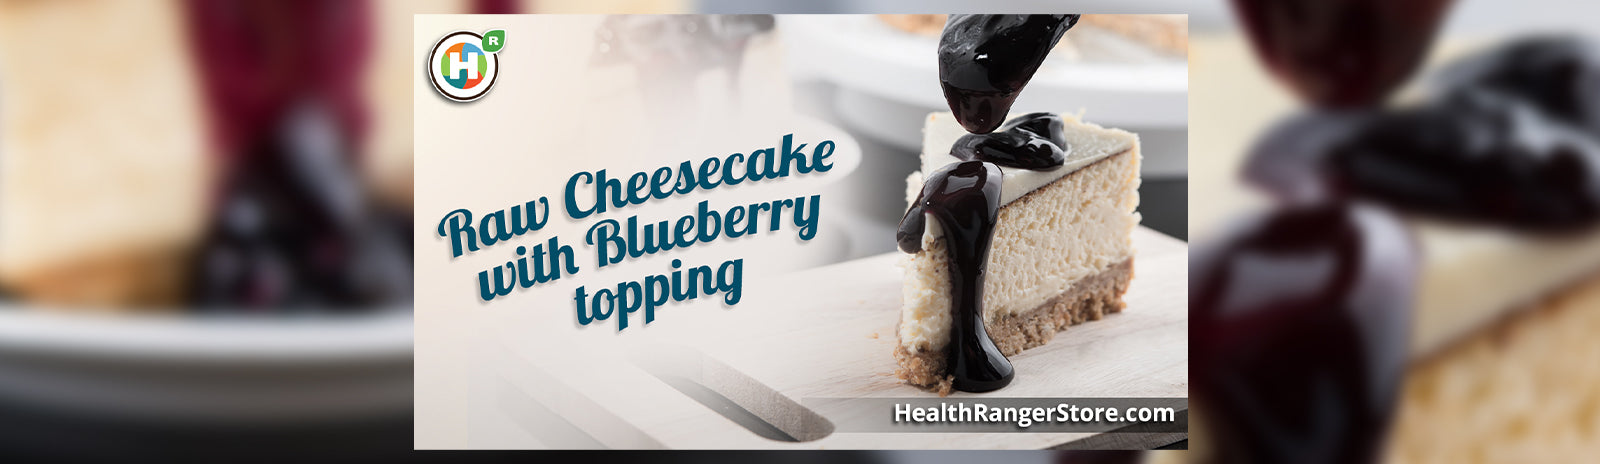 Raw Cheesecake with Blueberry topping